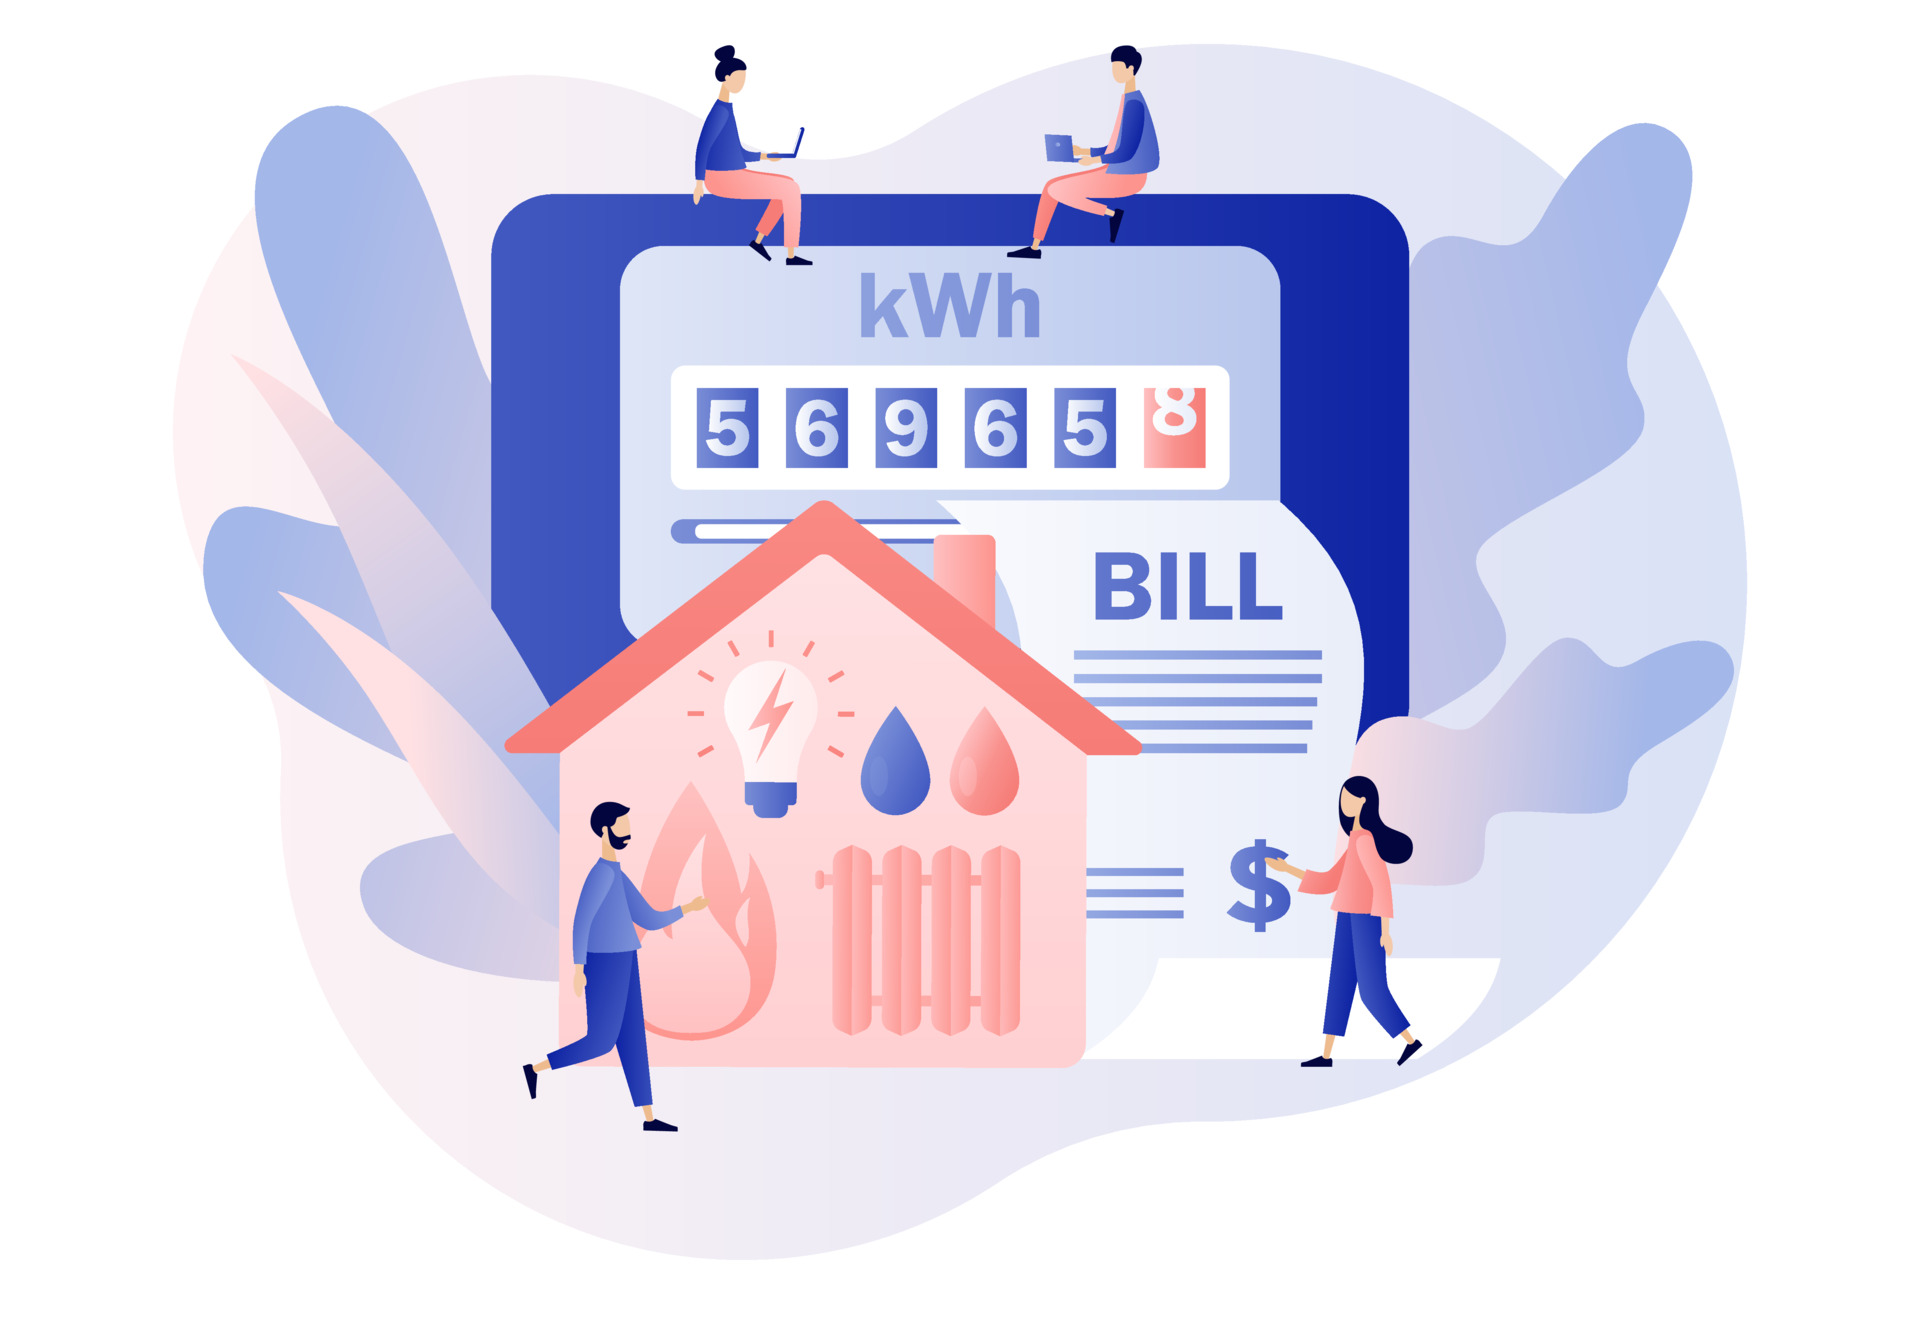 people analyzing electric bill data so that they can save money